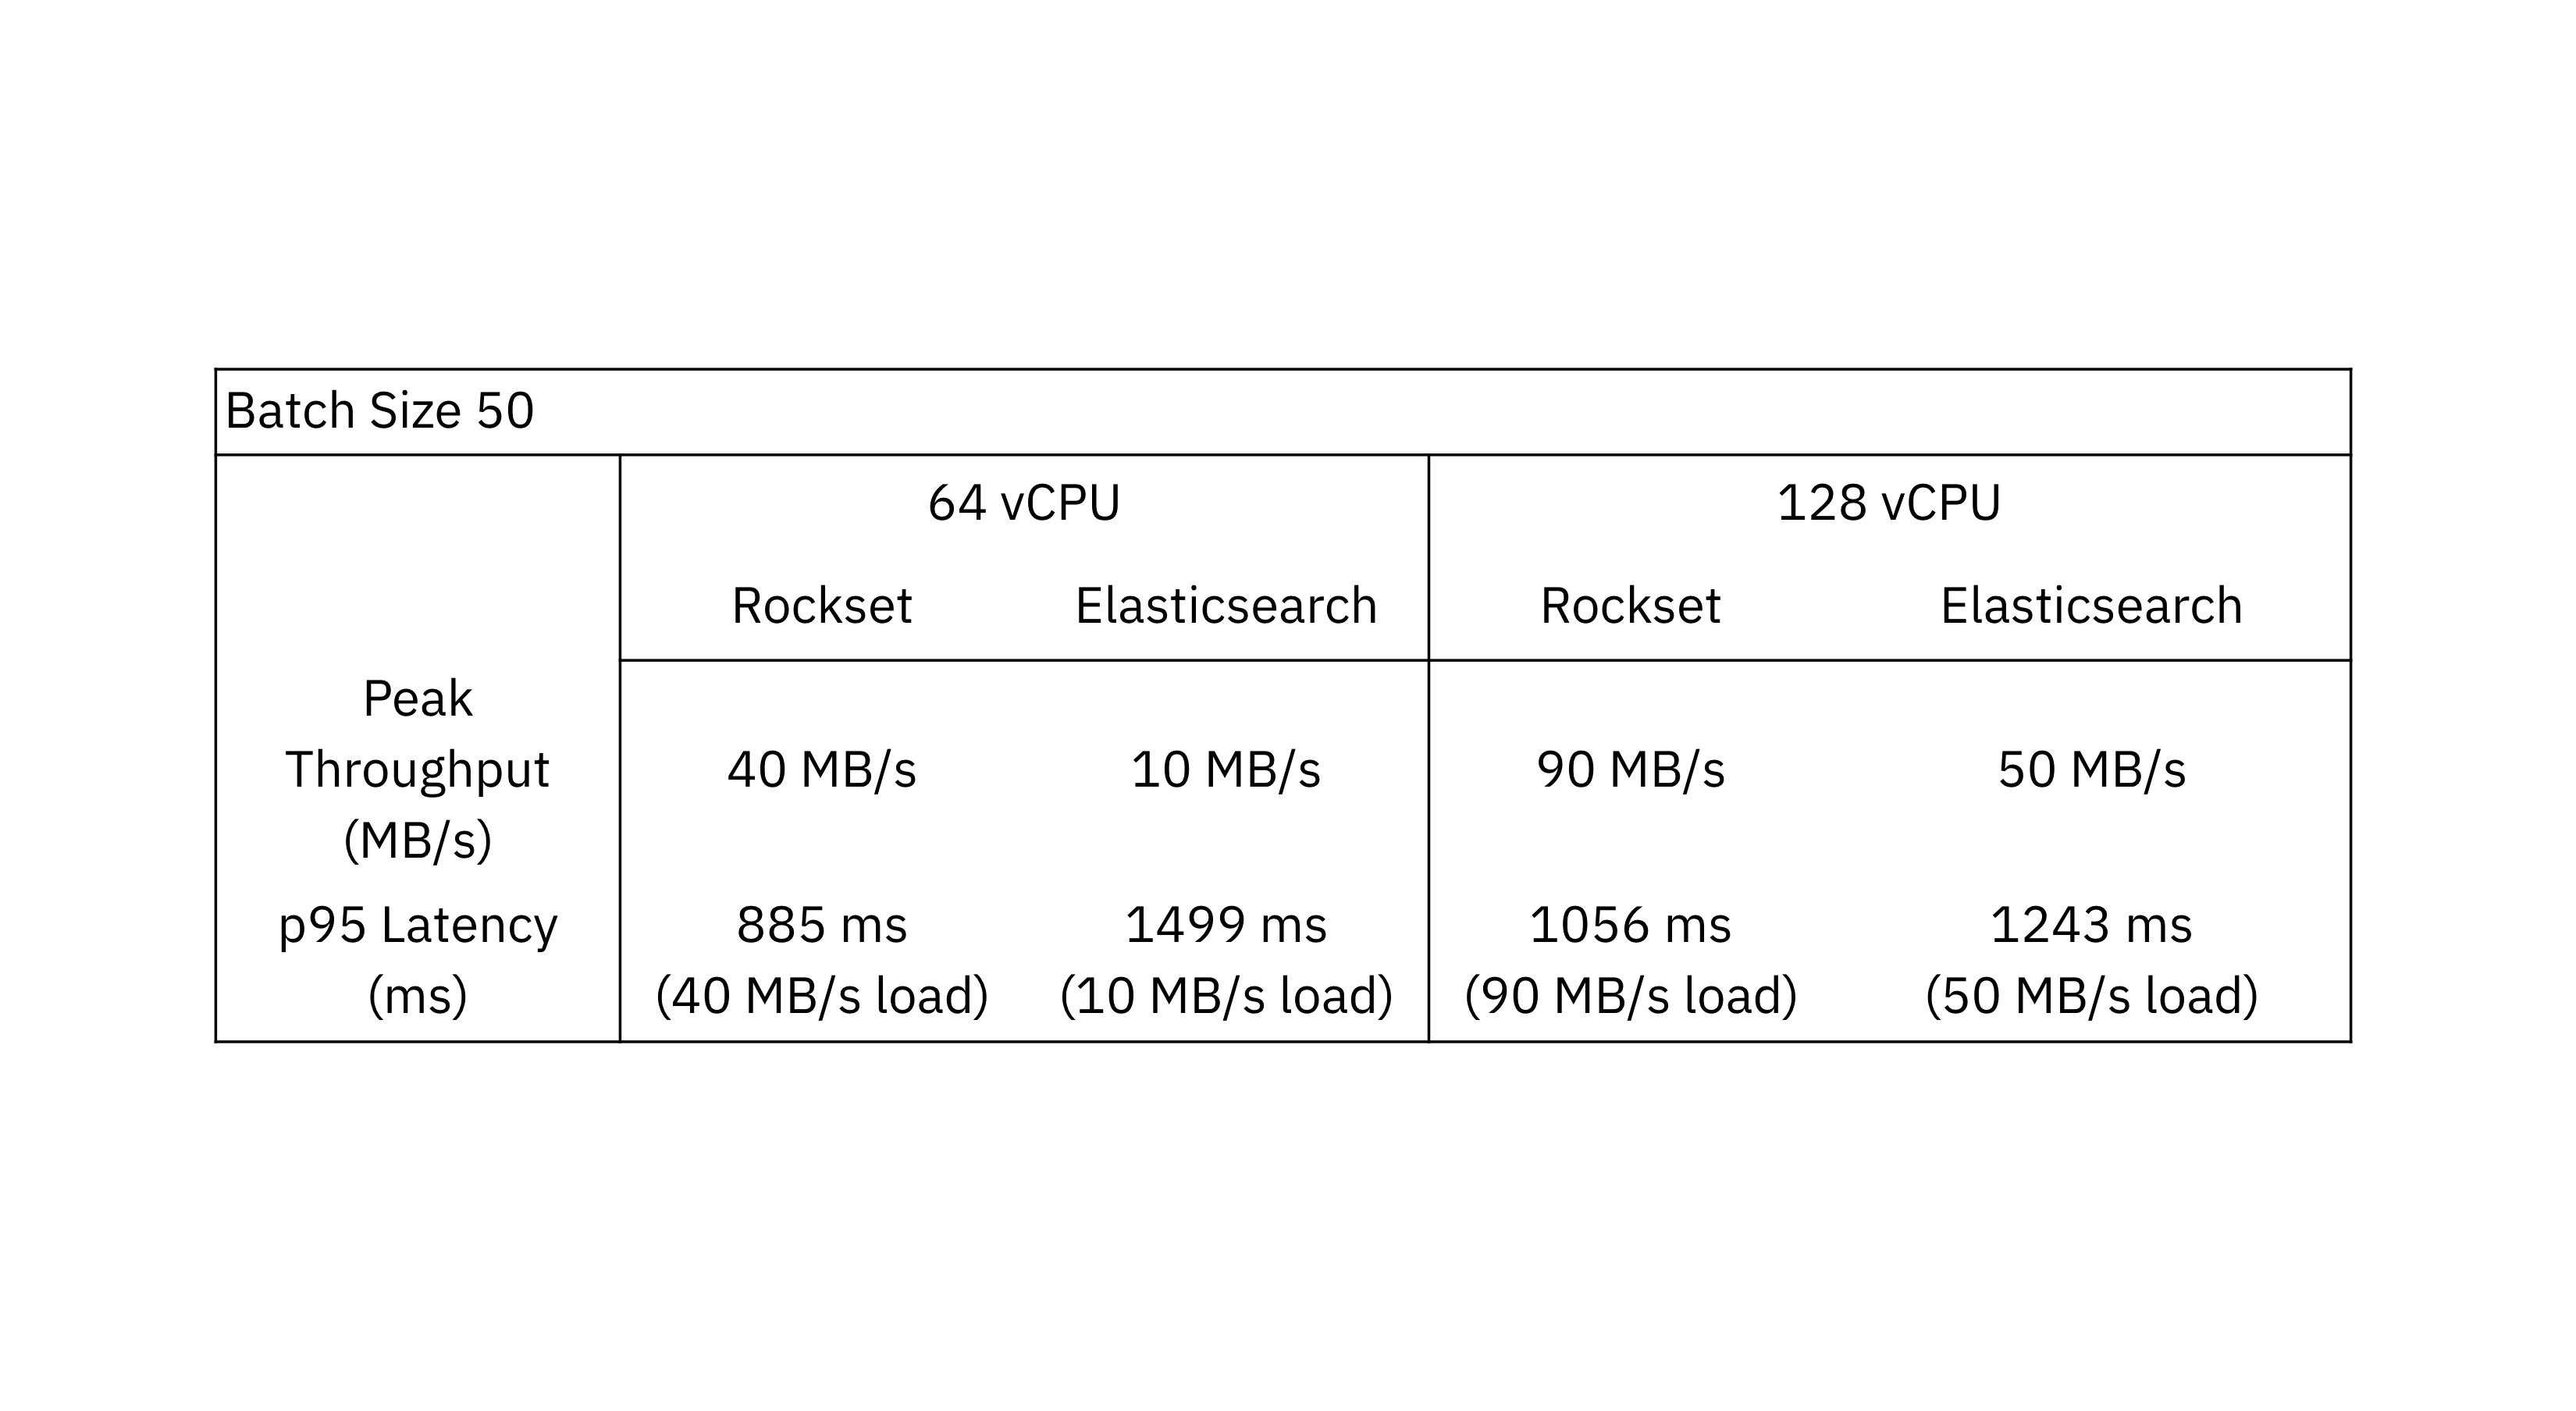 Table of the peak throughput and p95 latency of Elasticsearch and Rockset. Databases were evaluated using vCPU 64 and vCPU 128 instances and a batch size of 50.